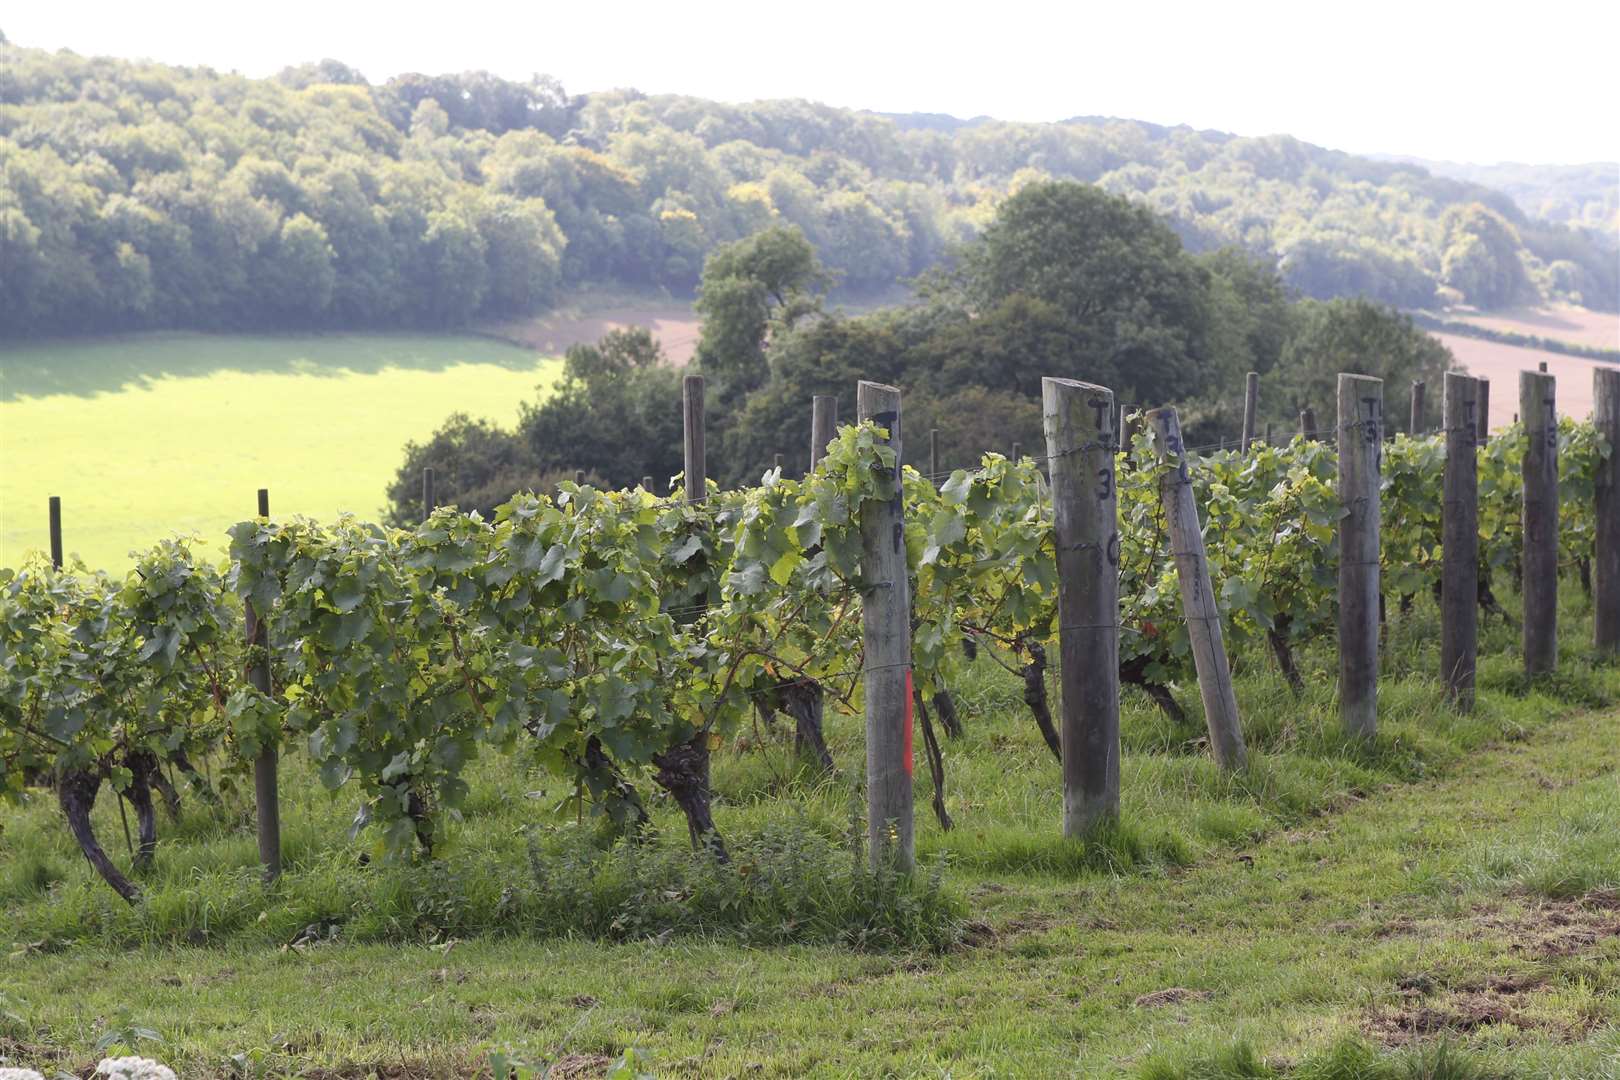 Police are investigating after Meopham Valley Vineyard was broken into earlier this month